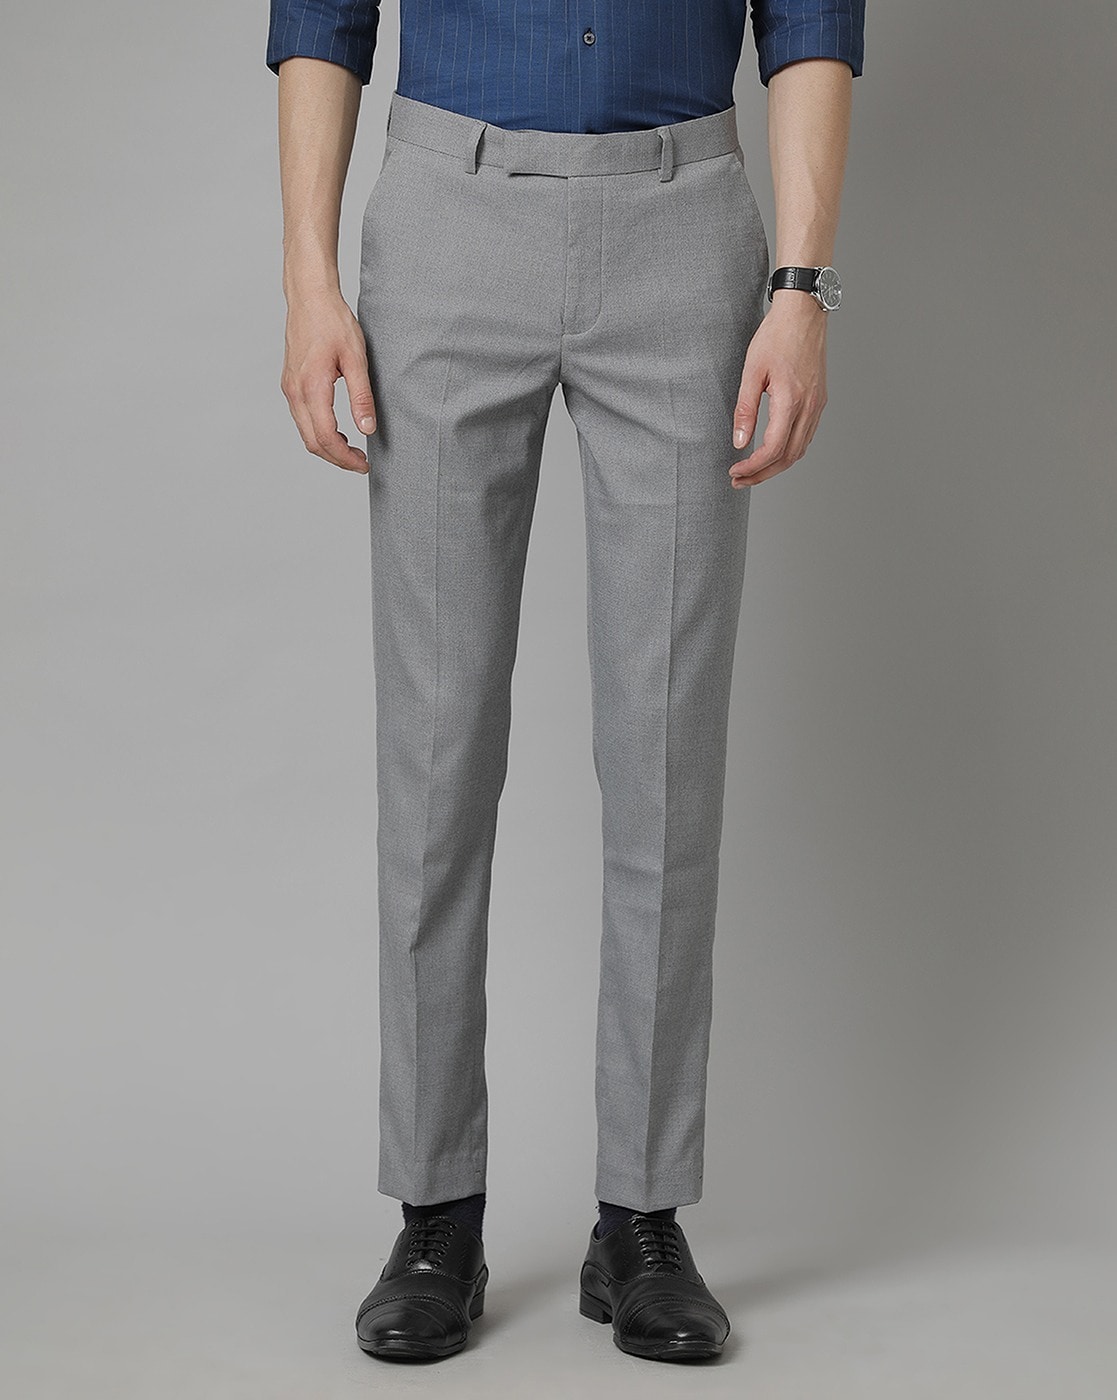 Grey Grey Formal Pants by Raymond for rent online | FLYROBE